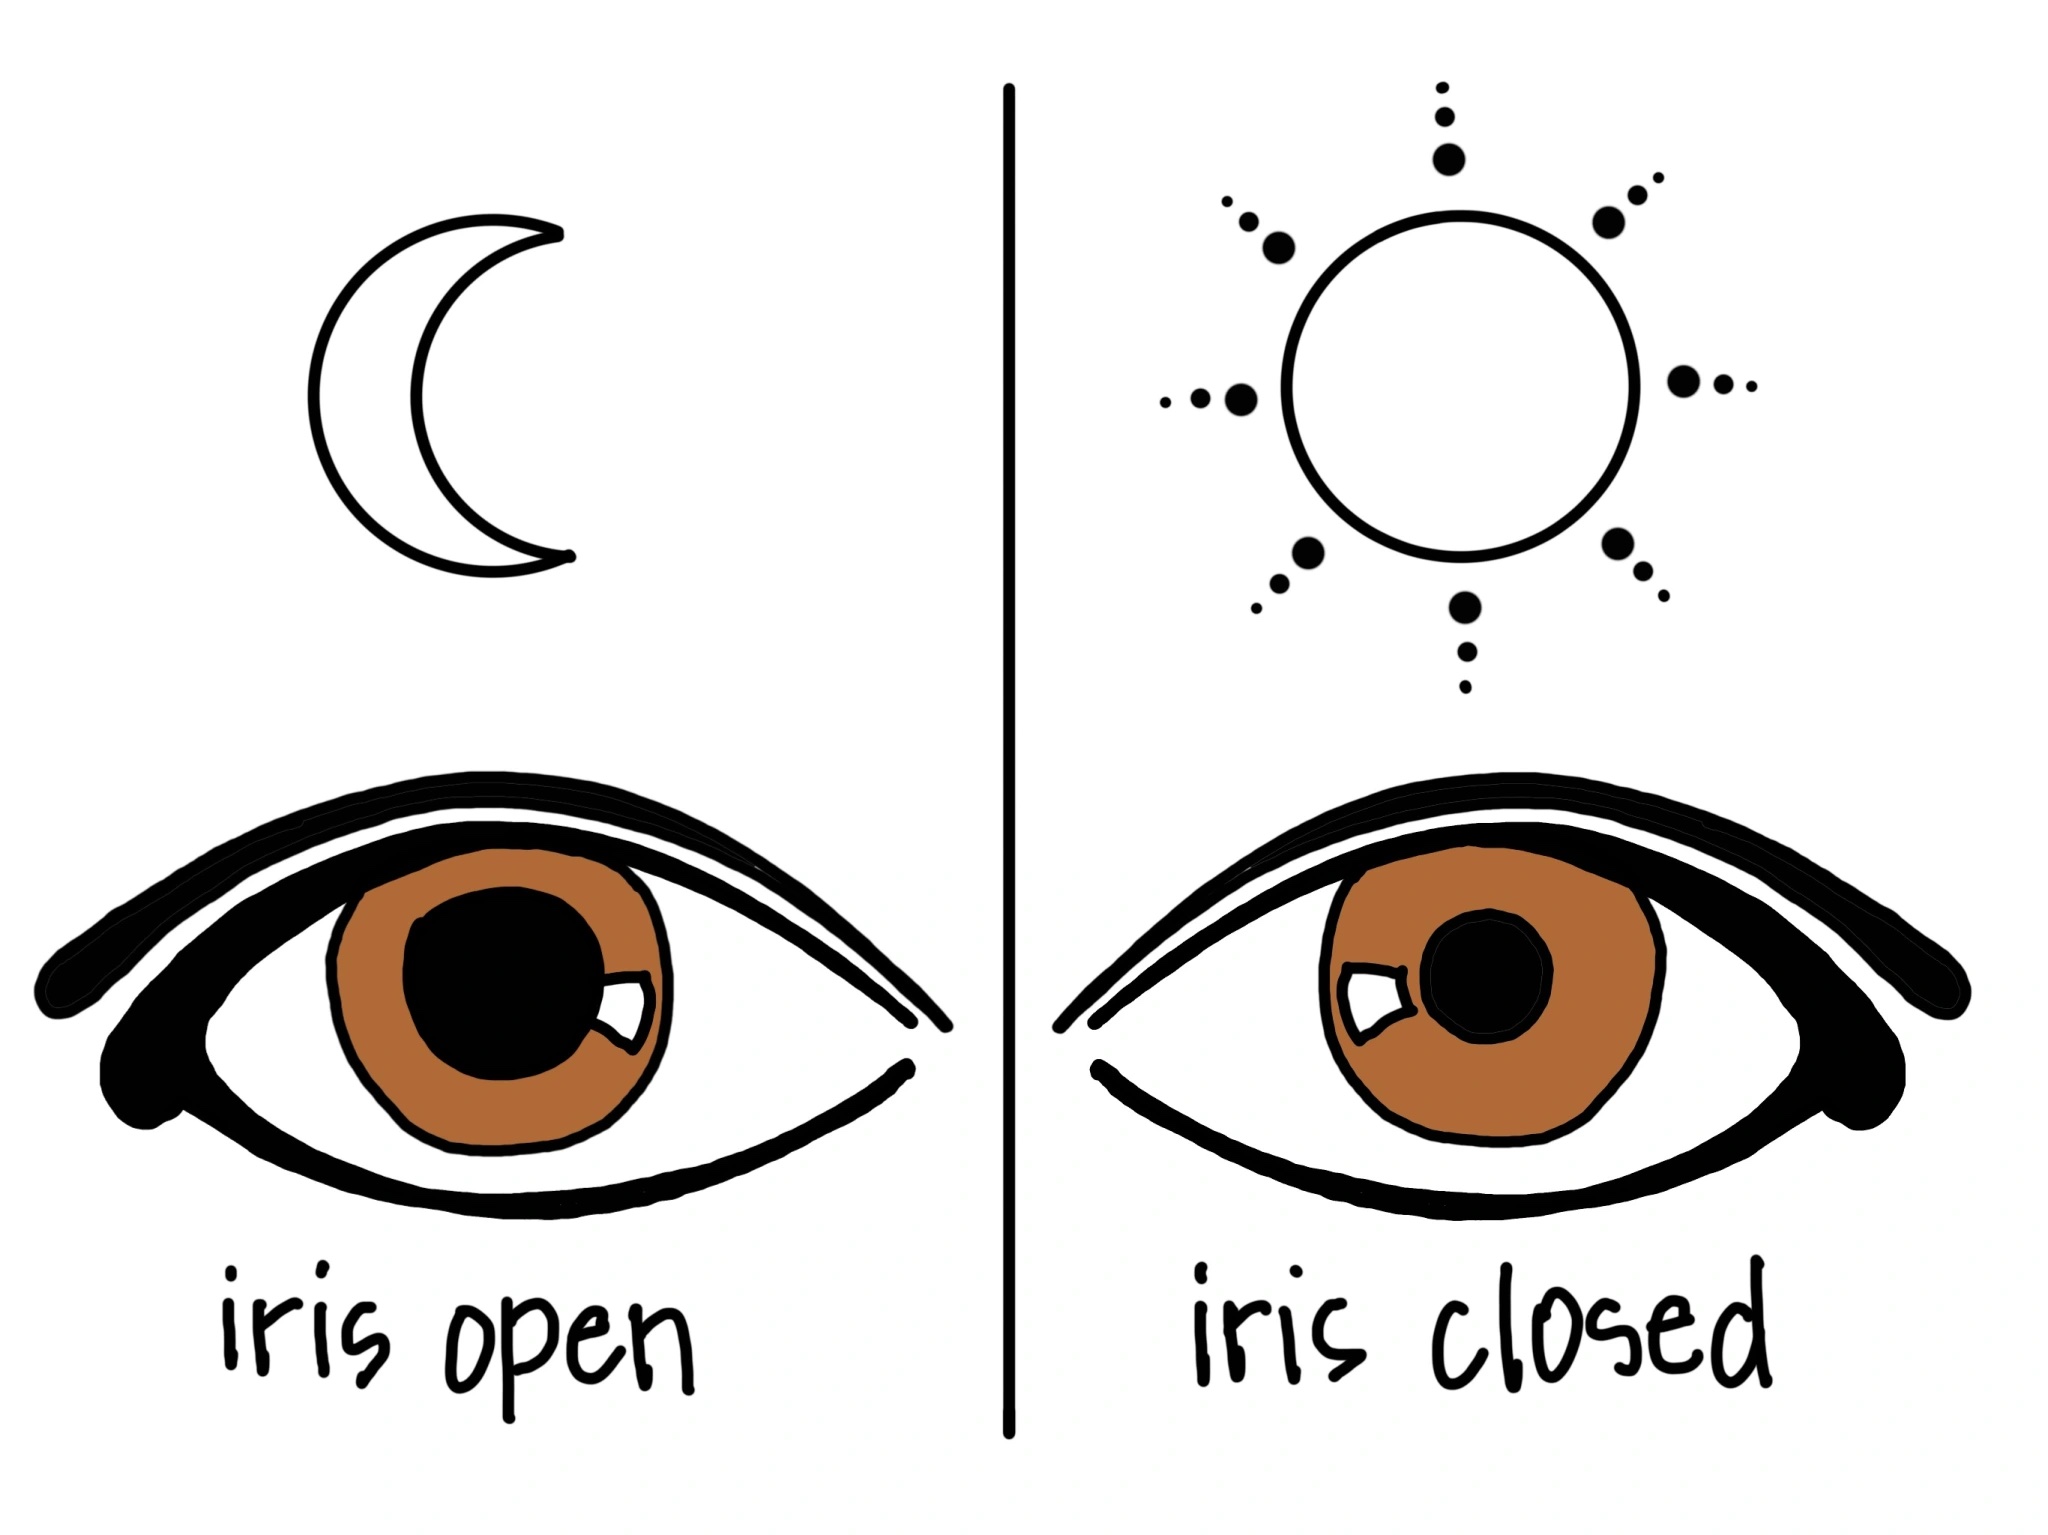 an illustration of a pair of eyes. A moon hangs over the left eye, and text labels it as "iris open." The iris is indeed open. A sun hangs over the right eye and text labels that as "iris closed." The iris is smaller than the left eye.